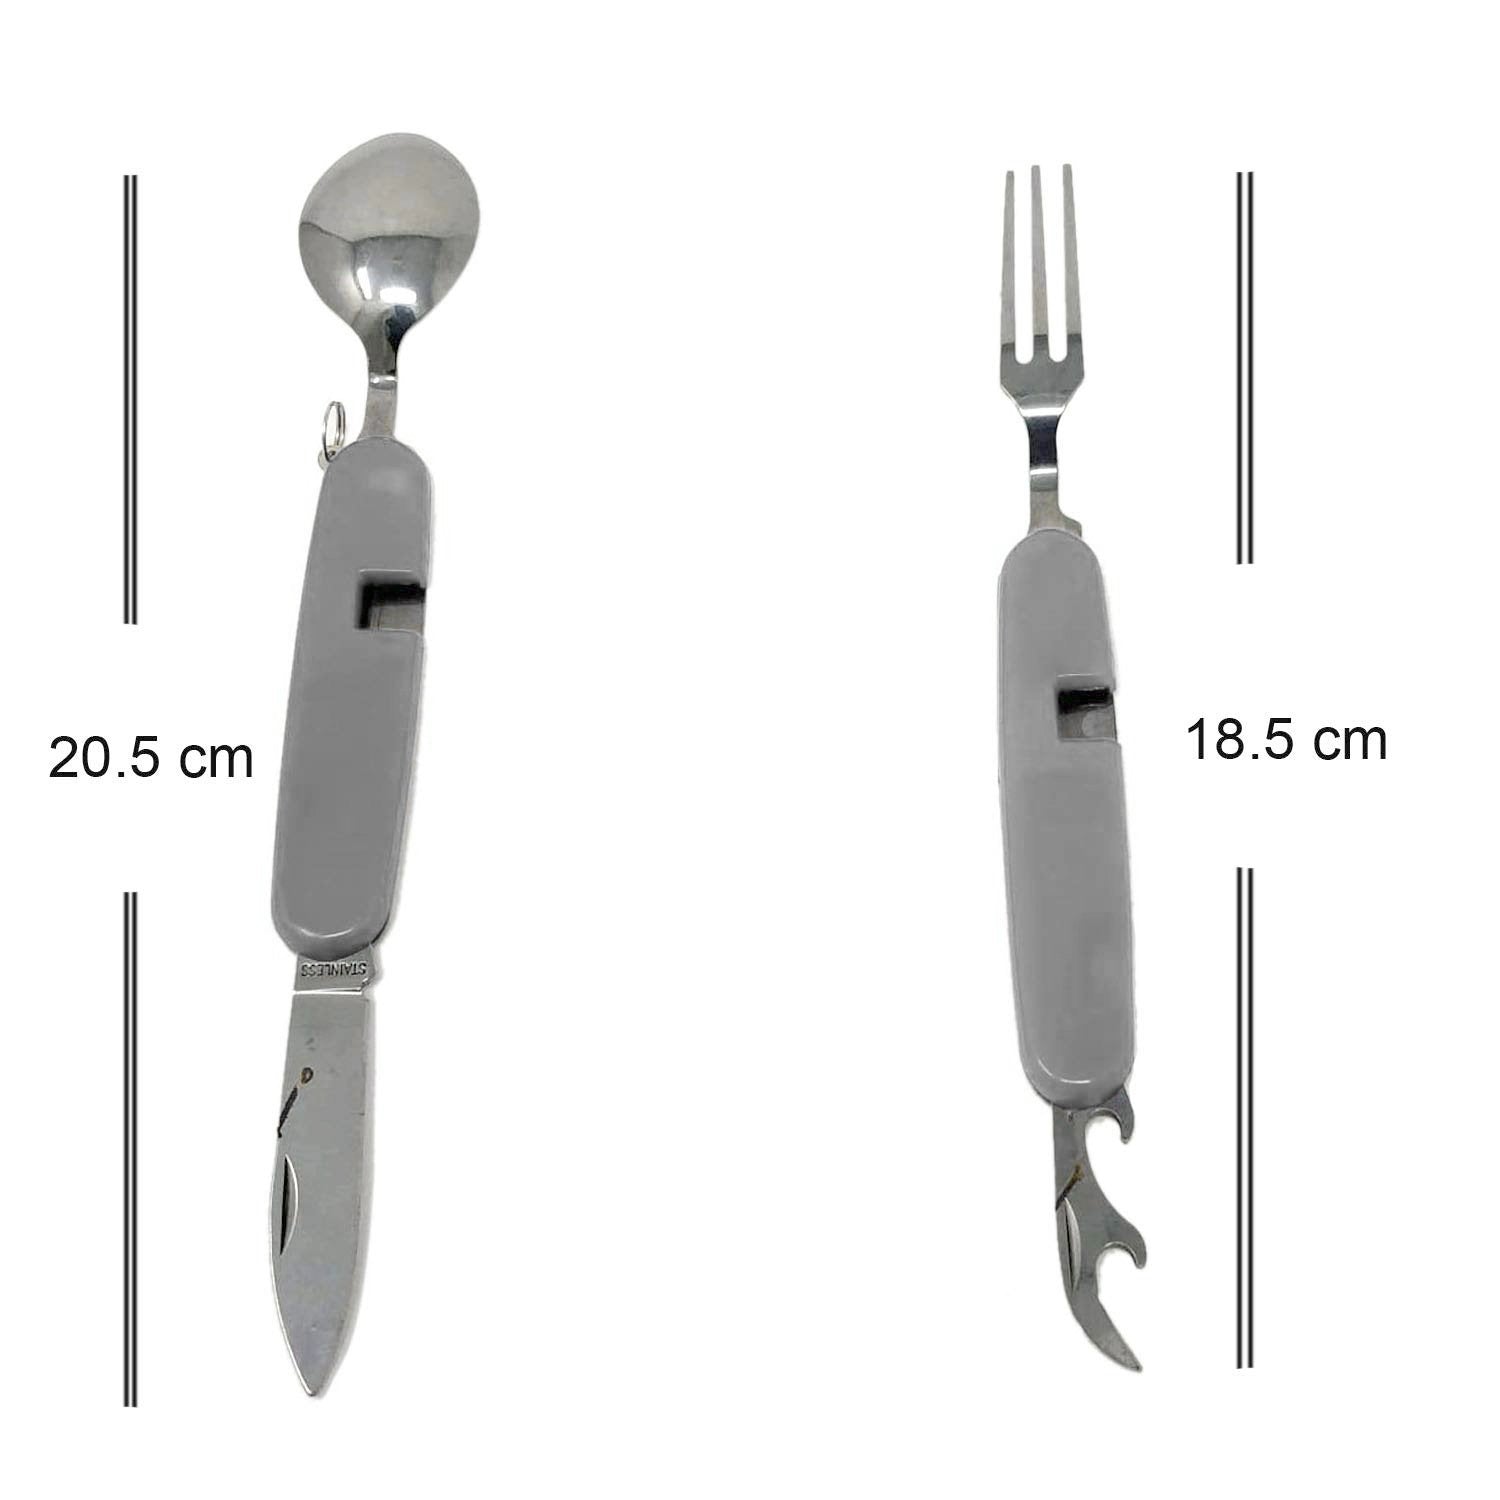 1779 4-in-1 Stainless Steel Travel/Camping Folding Multi Swiss Cutlery Set